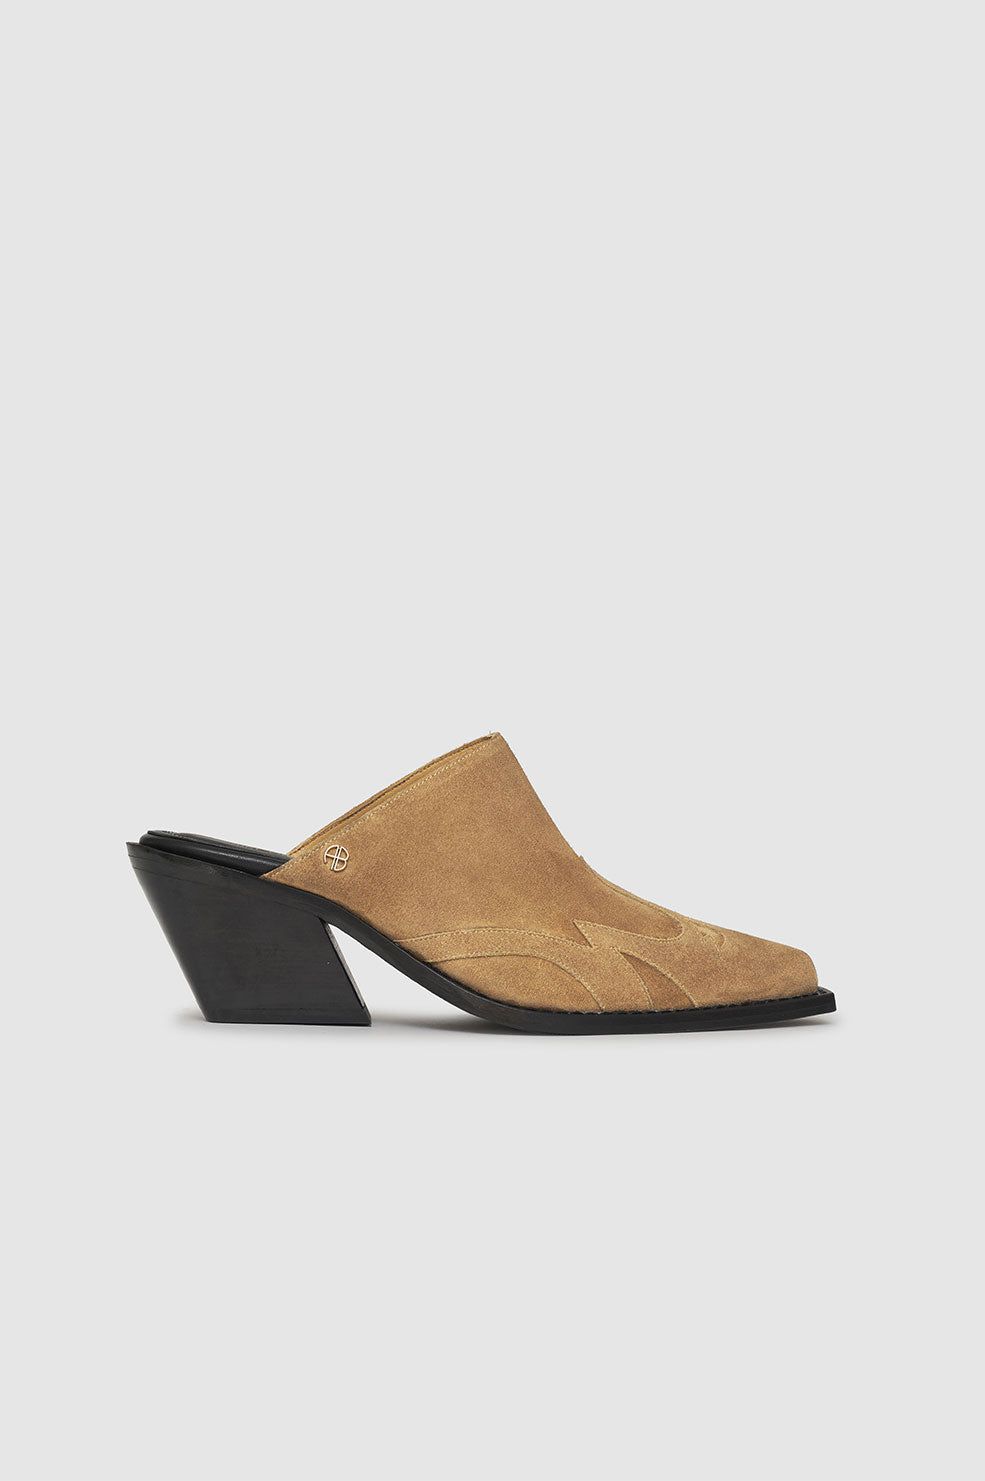 ANINE BING Tania Mules - Camel - Side Single View